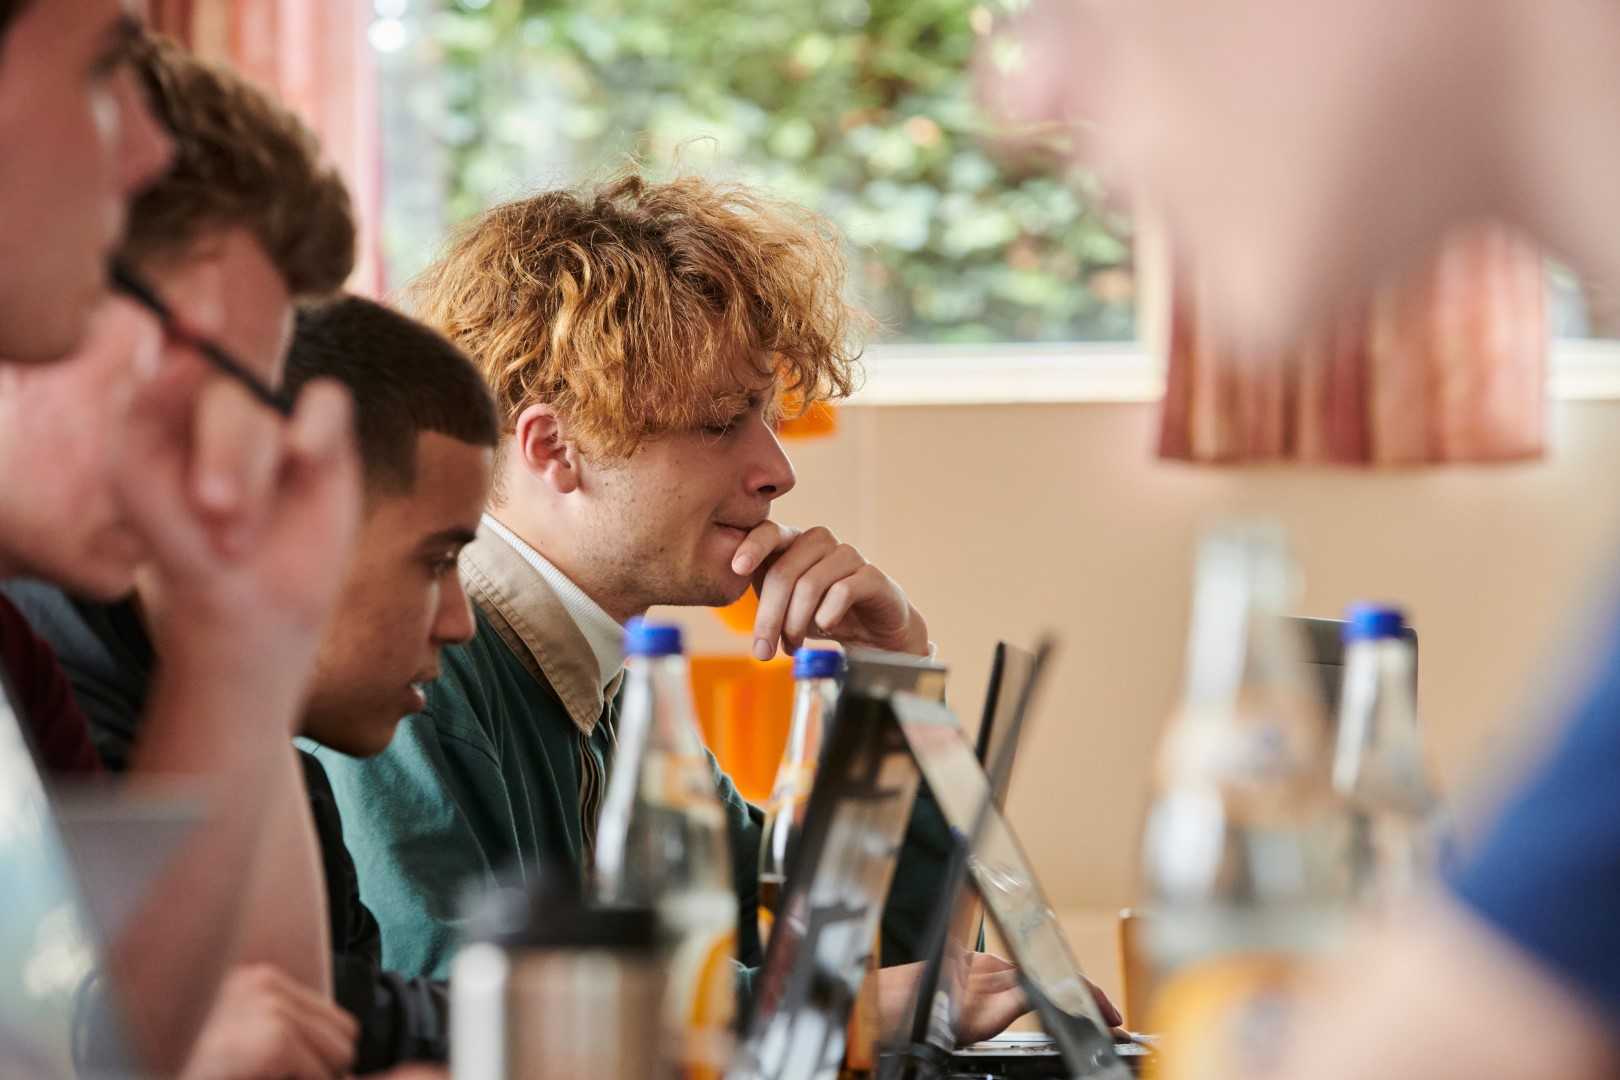 Hacker during the bootcamp looking at his laptop